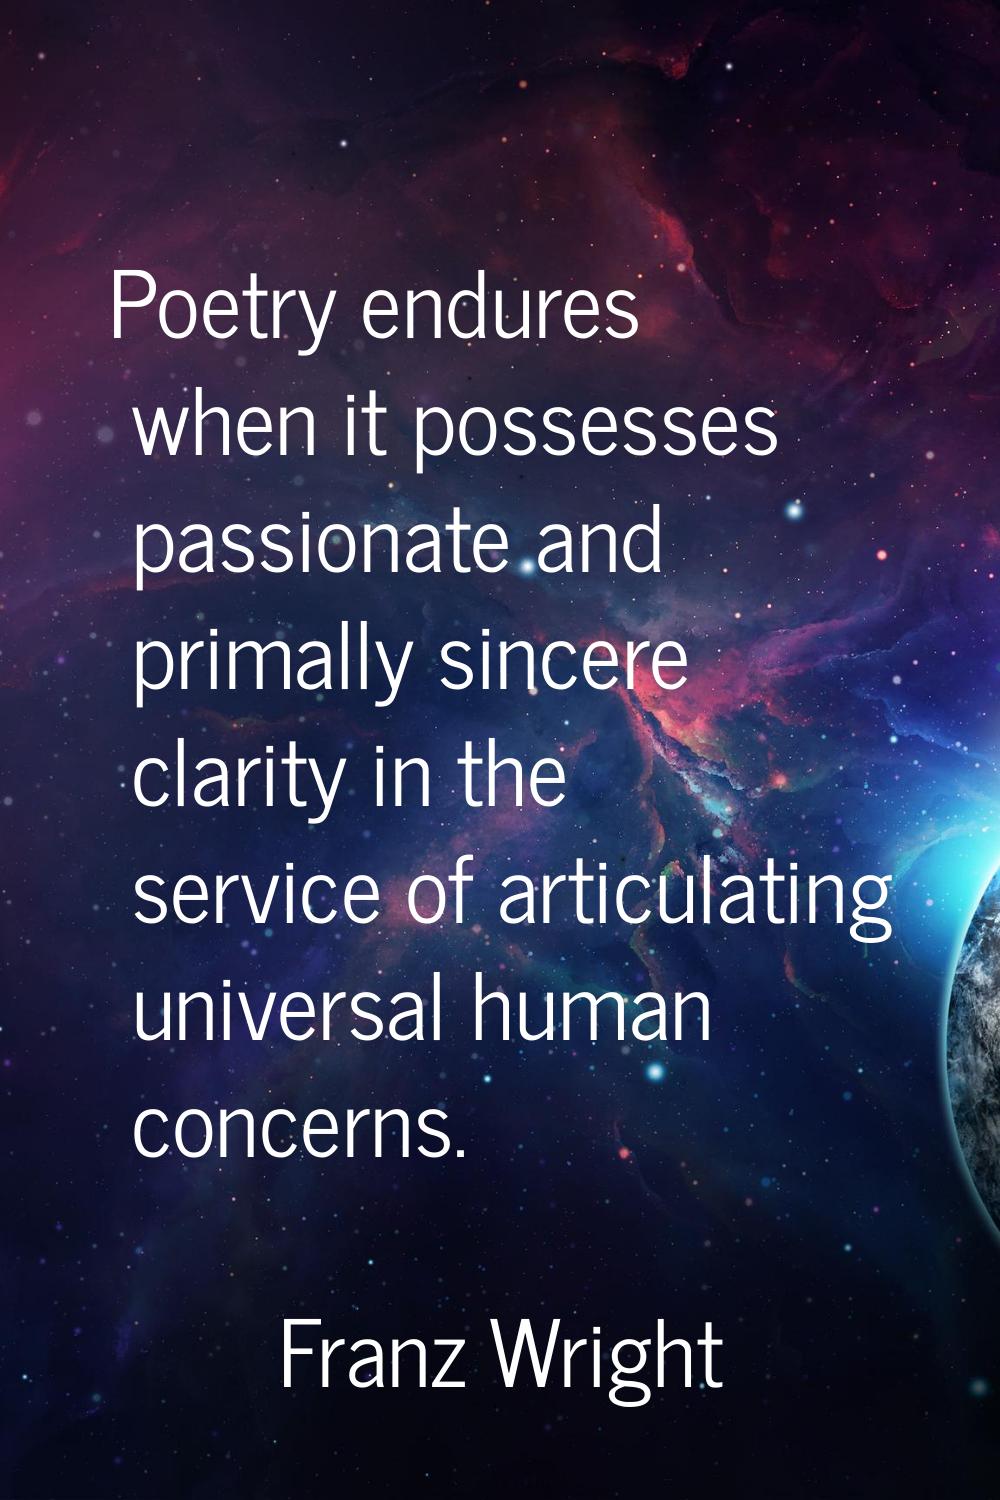 Poetry endures when it possesses passionate and primally sincere clarity in the service of articula